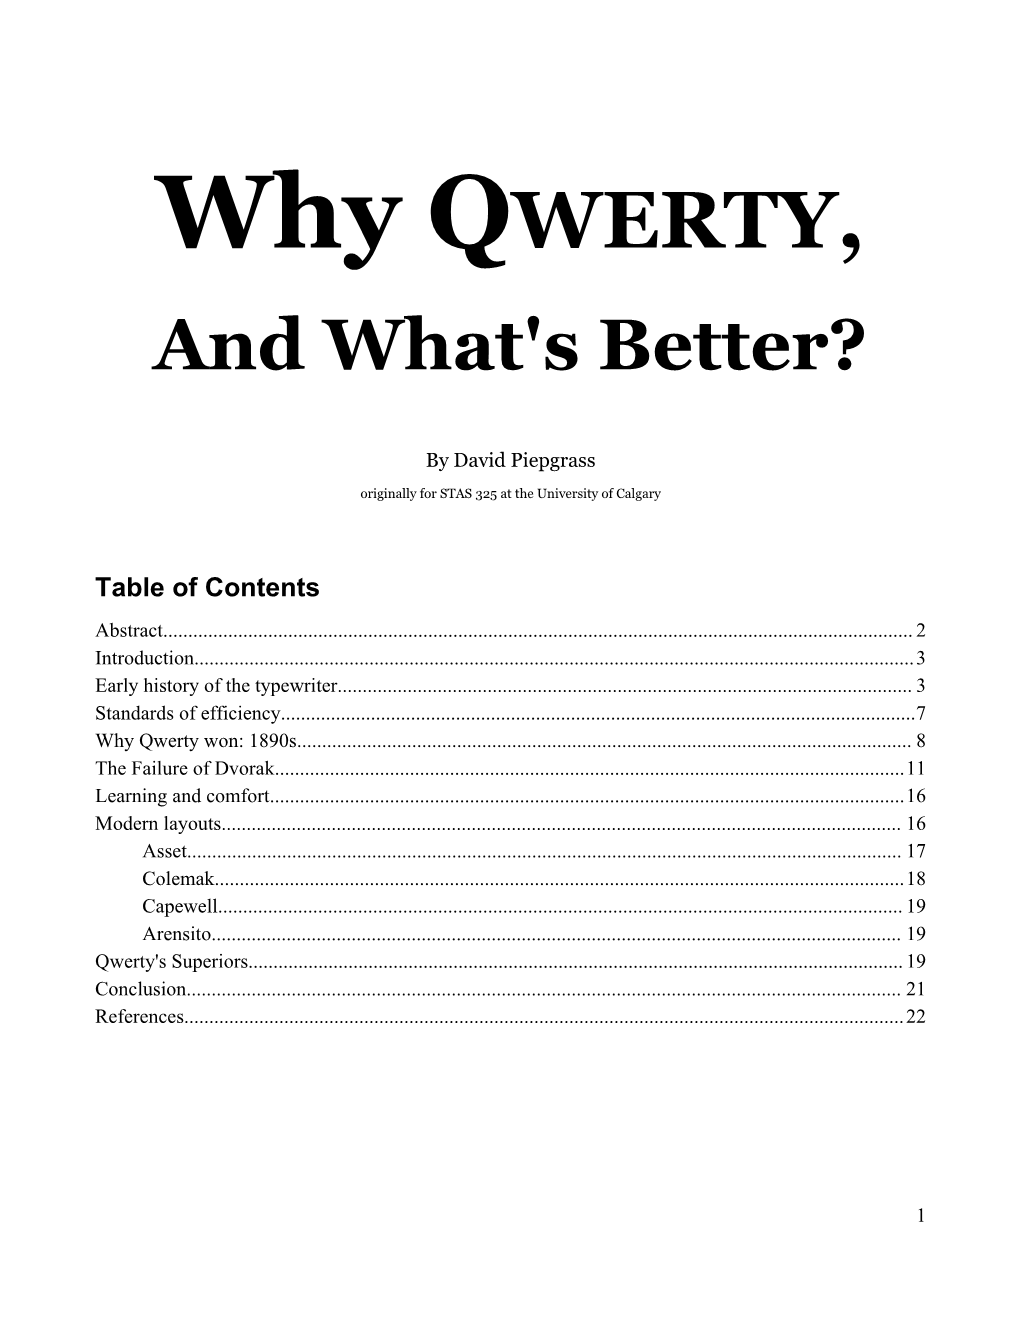 Why QWERTY, and What's Better?